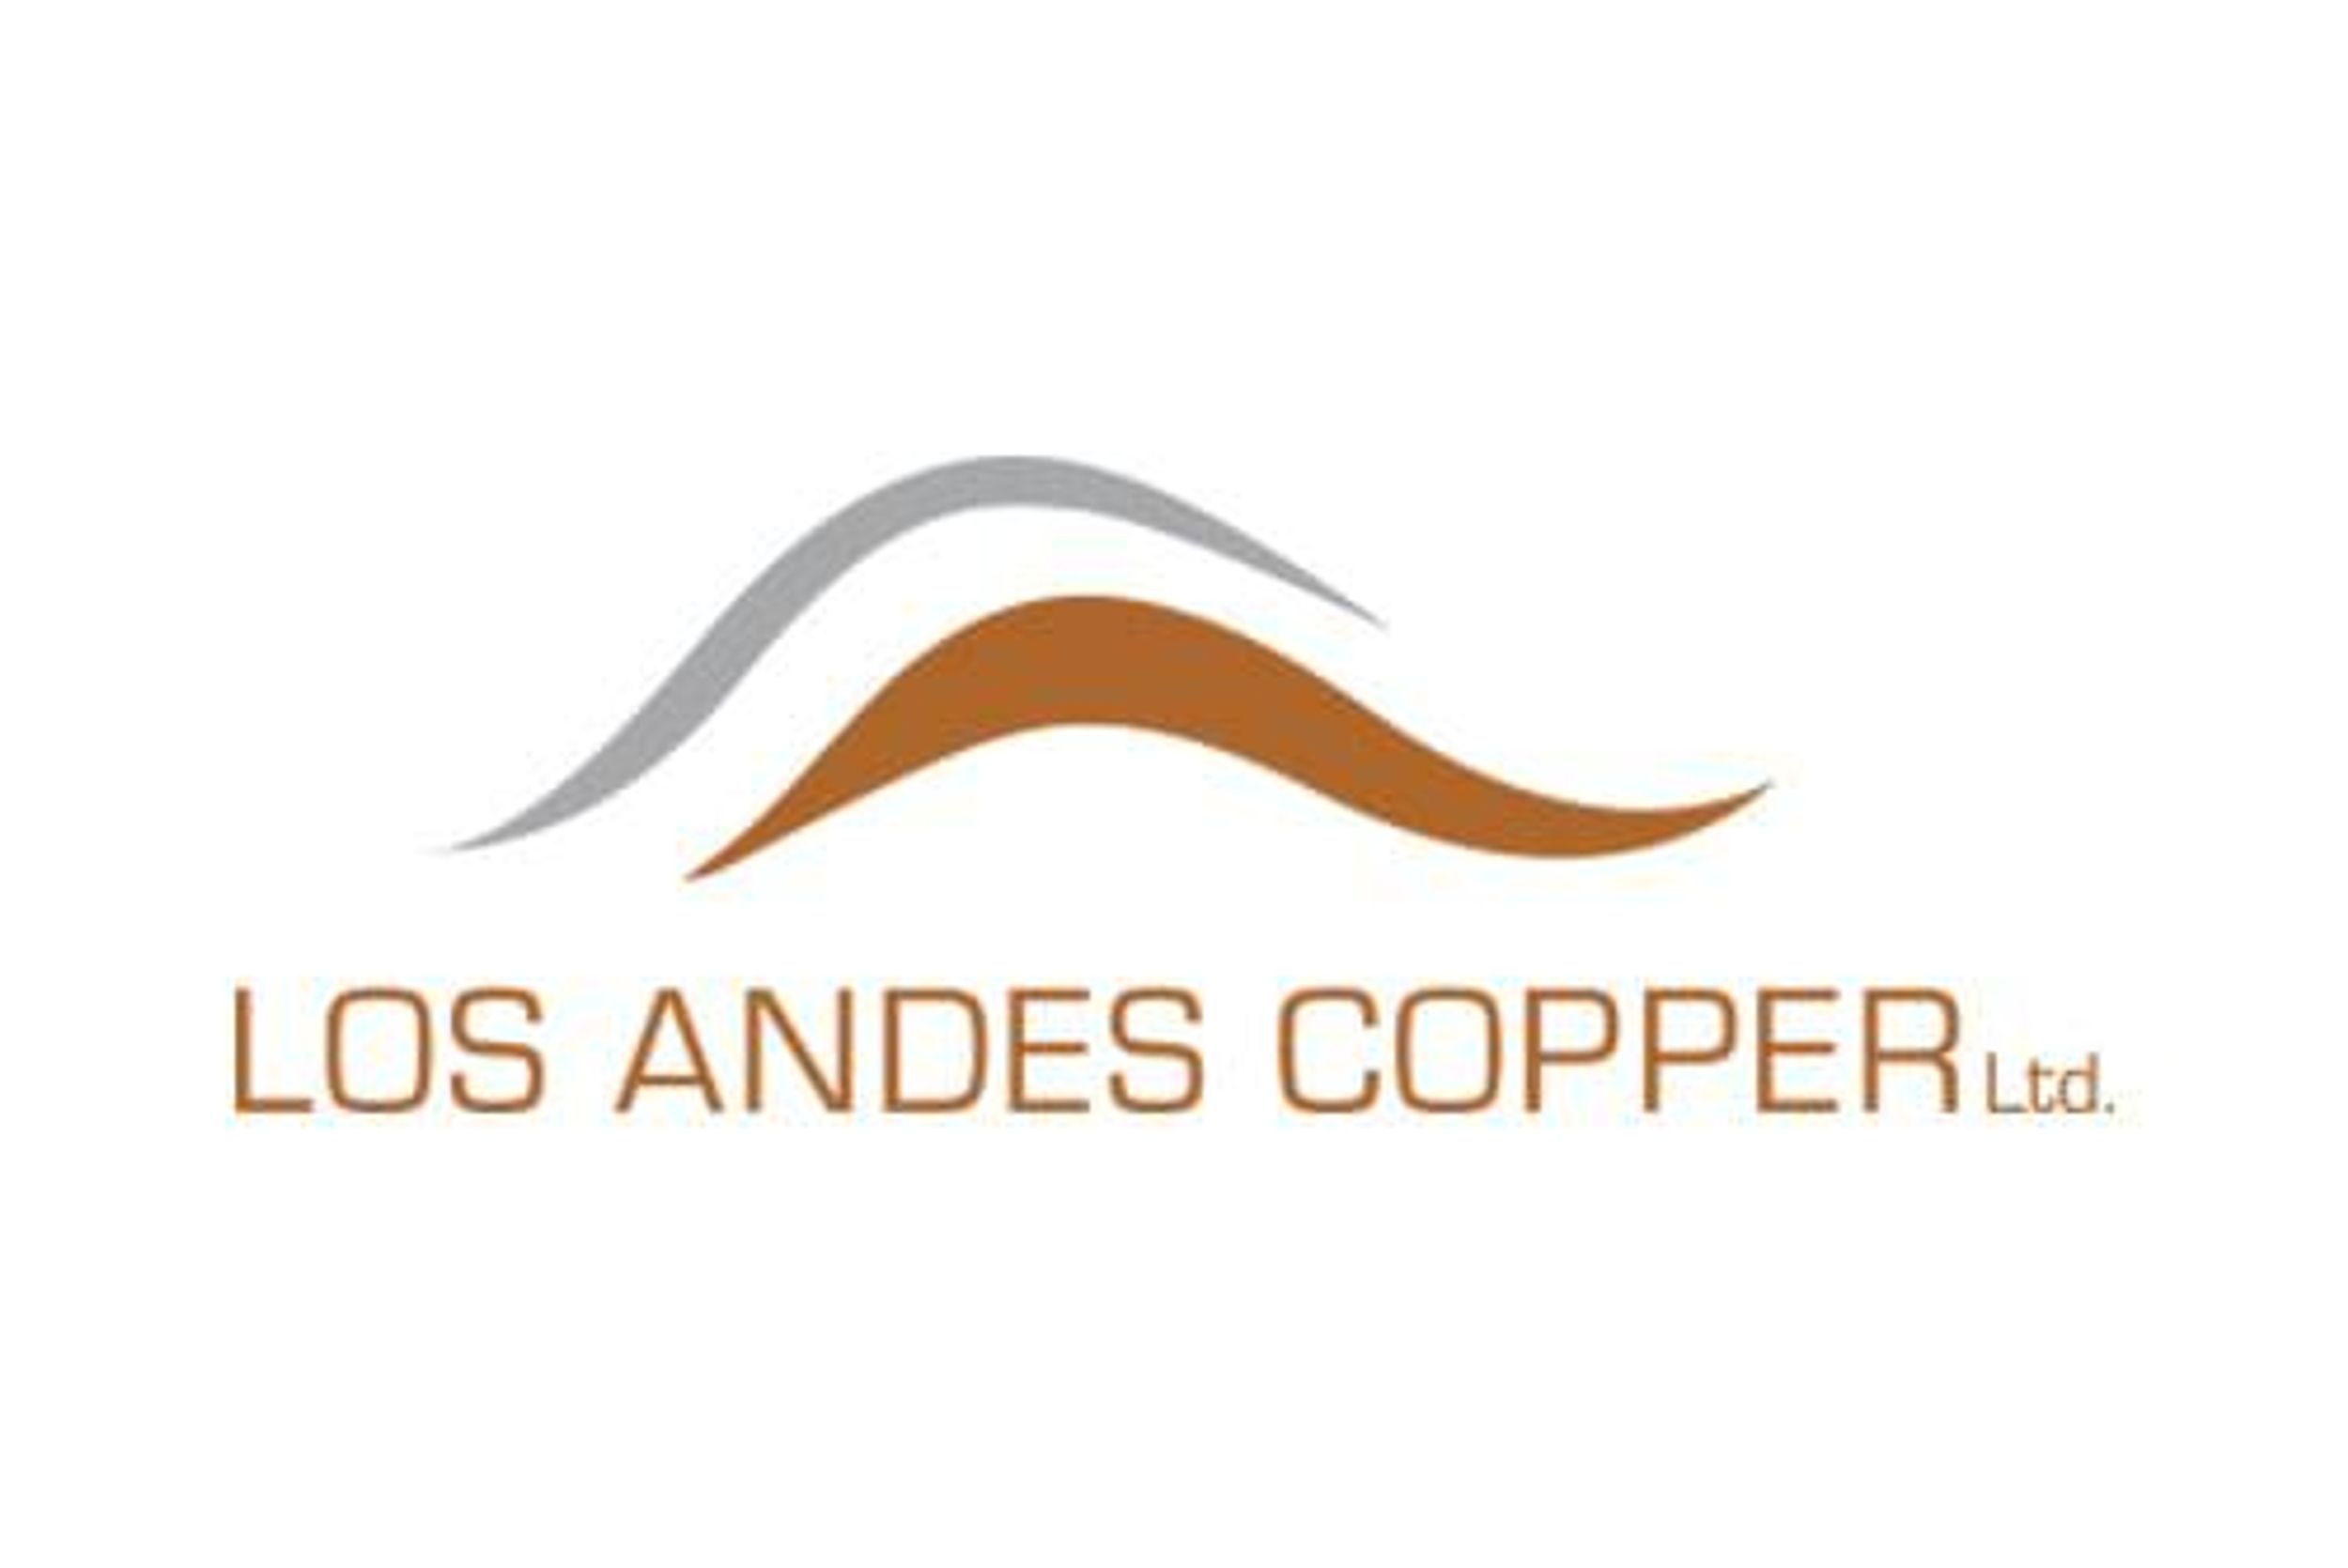 Los Andes Copper Announces Notice of Planned Payment of US$ 5,000,0000 to the Company Under the 2020 Royalty Agreement